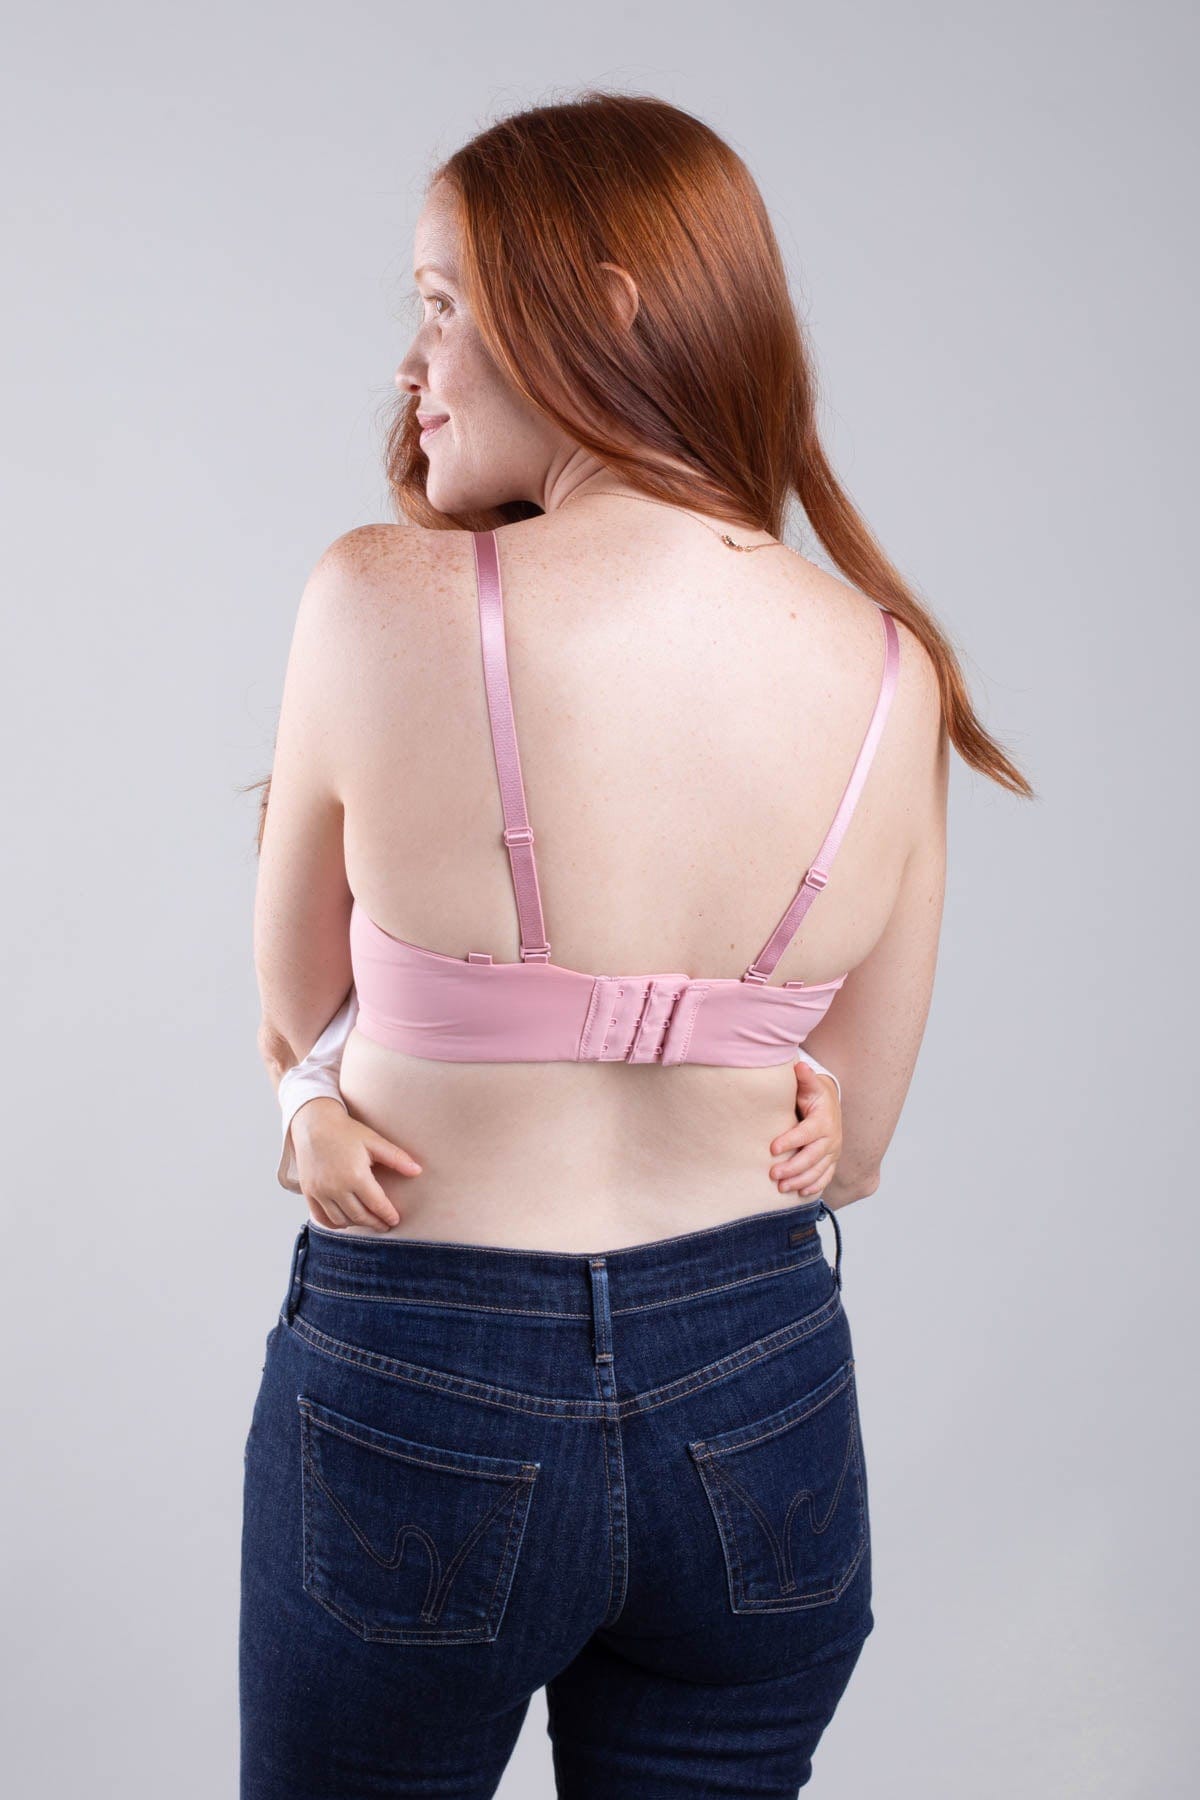 Simple Wishes Undercover nursing t-shirt bra with hide the nursing clasp feature in rose pink shown with baby back view